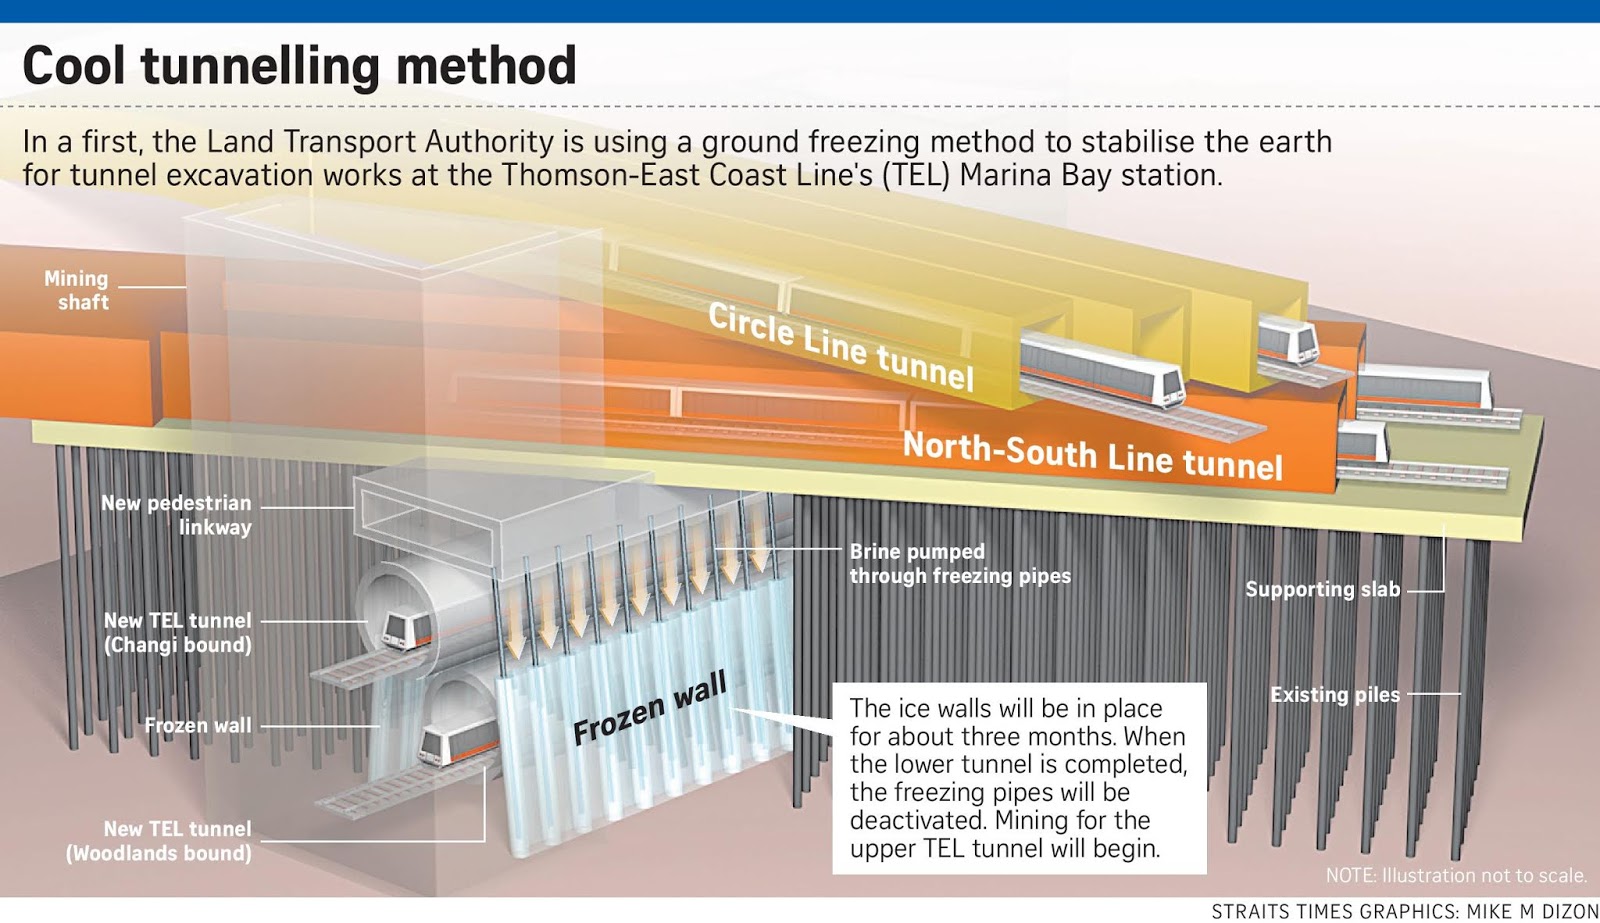 If Only Singaporeans Stopped To Think Thomson Line Groundbreaking - it is required because the soil which workers are tunnelling through is old alluvium which is highly permeable and susceptible to water seepage